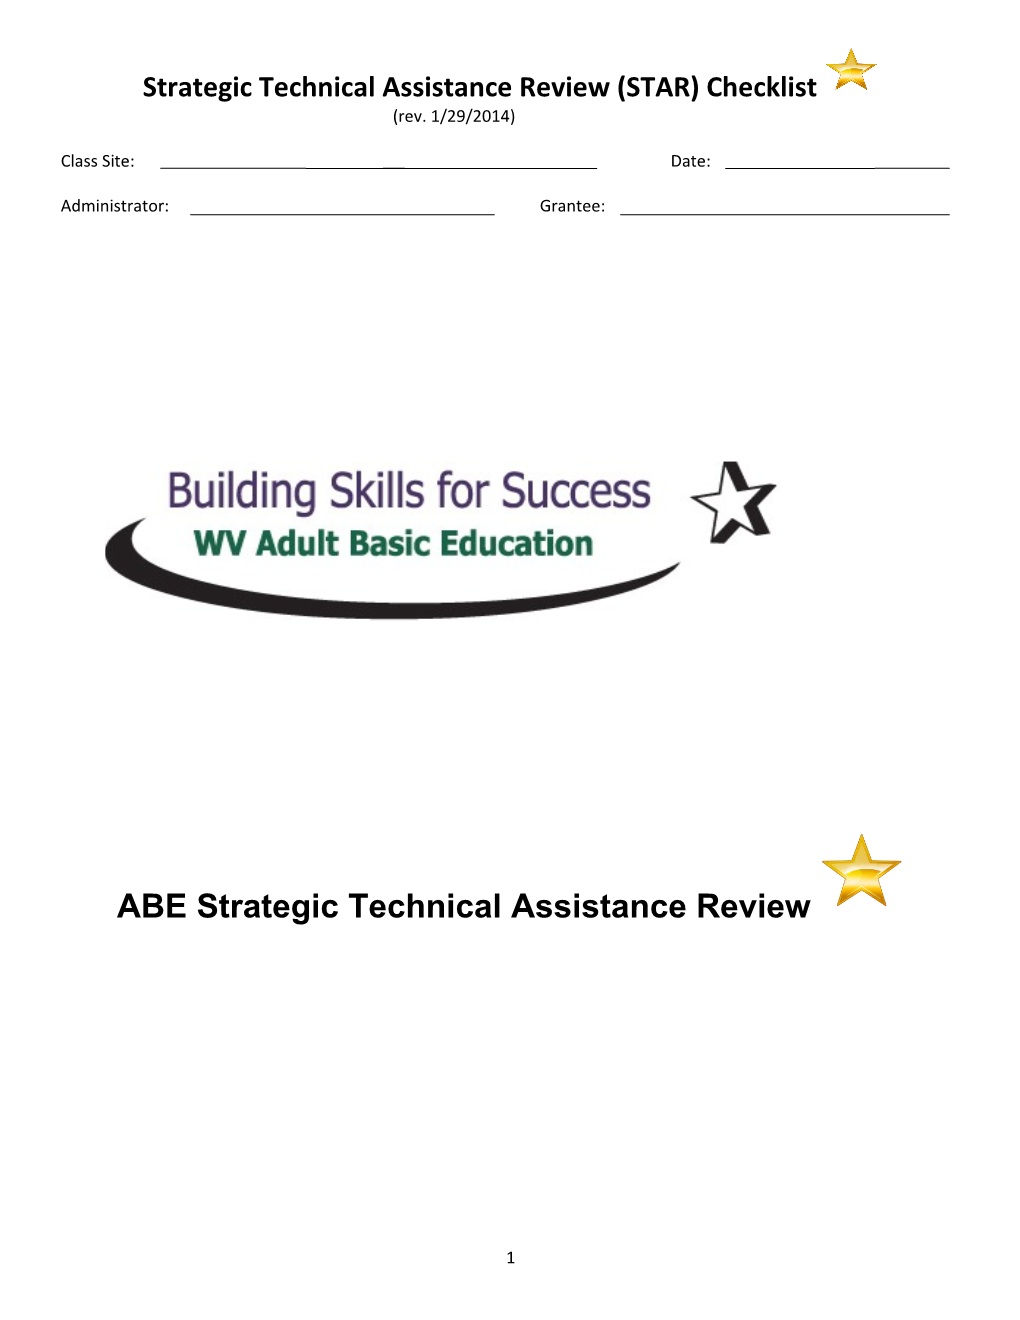 Strategic Technical Assistance Review (STAR) Checklist